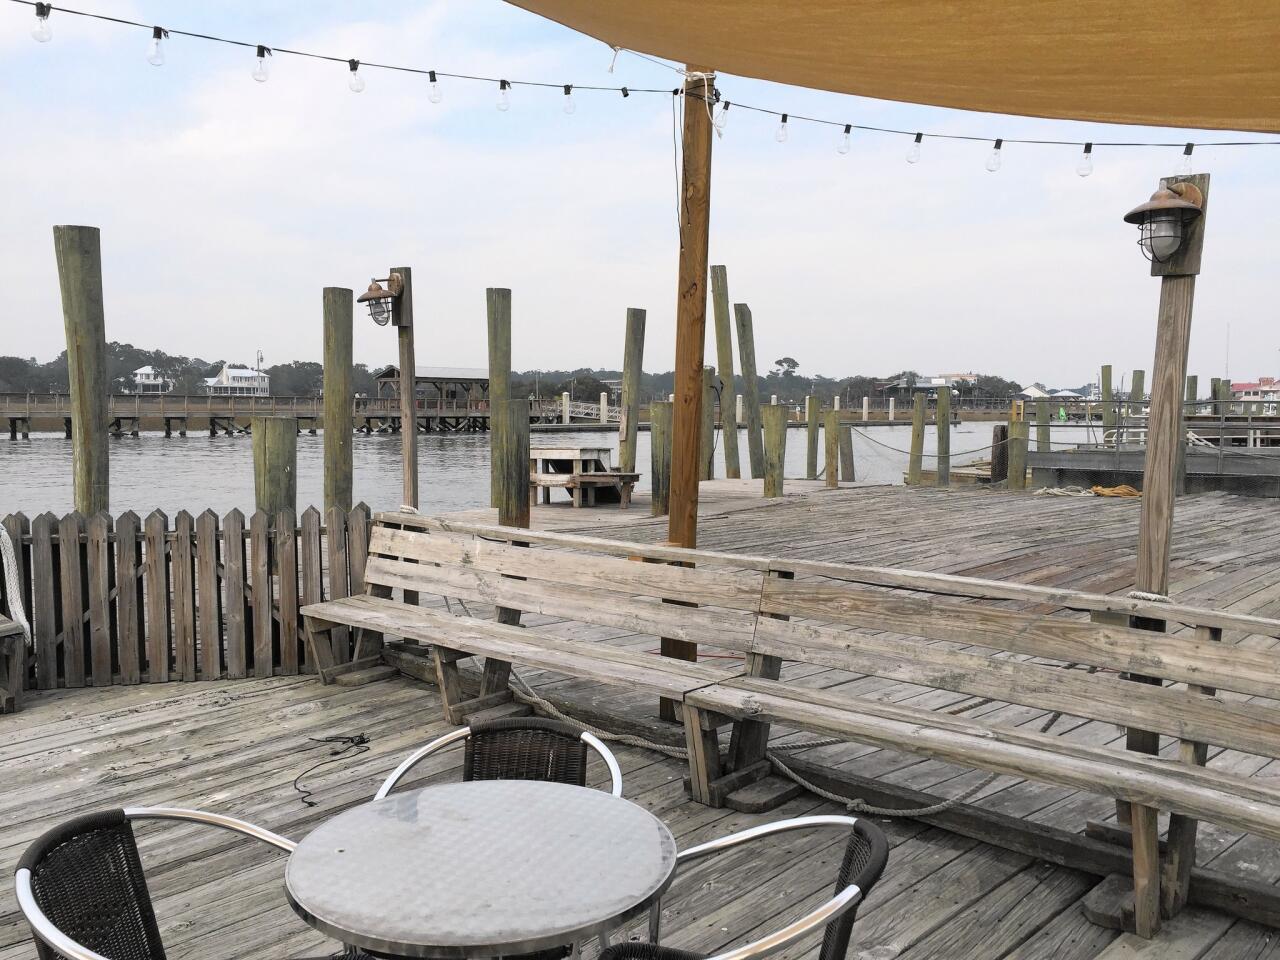 The Wreck is a casual eatery on Shem Creek in Mount Pleasant, a suburb of Charleston. One of the challenges on the upcoming season of "Top Chef" was filmed here.